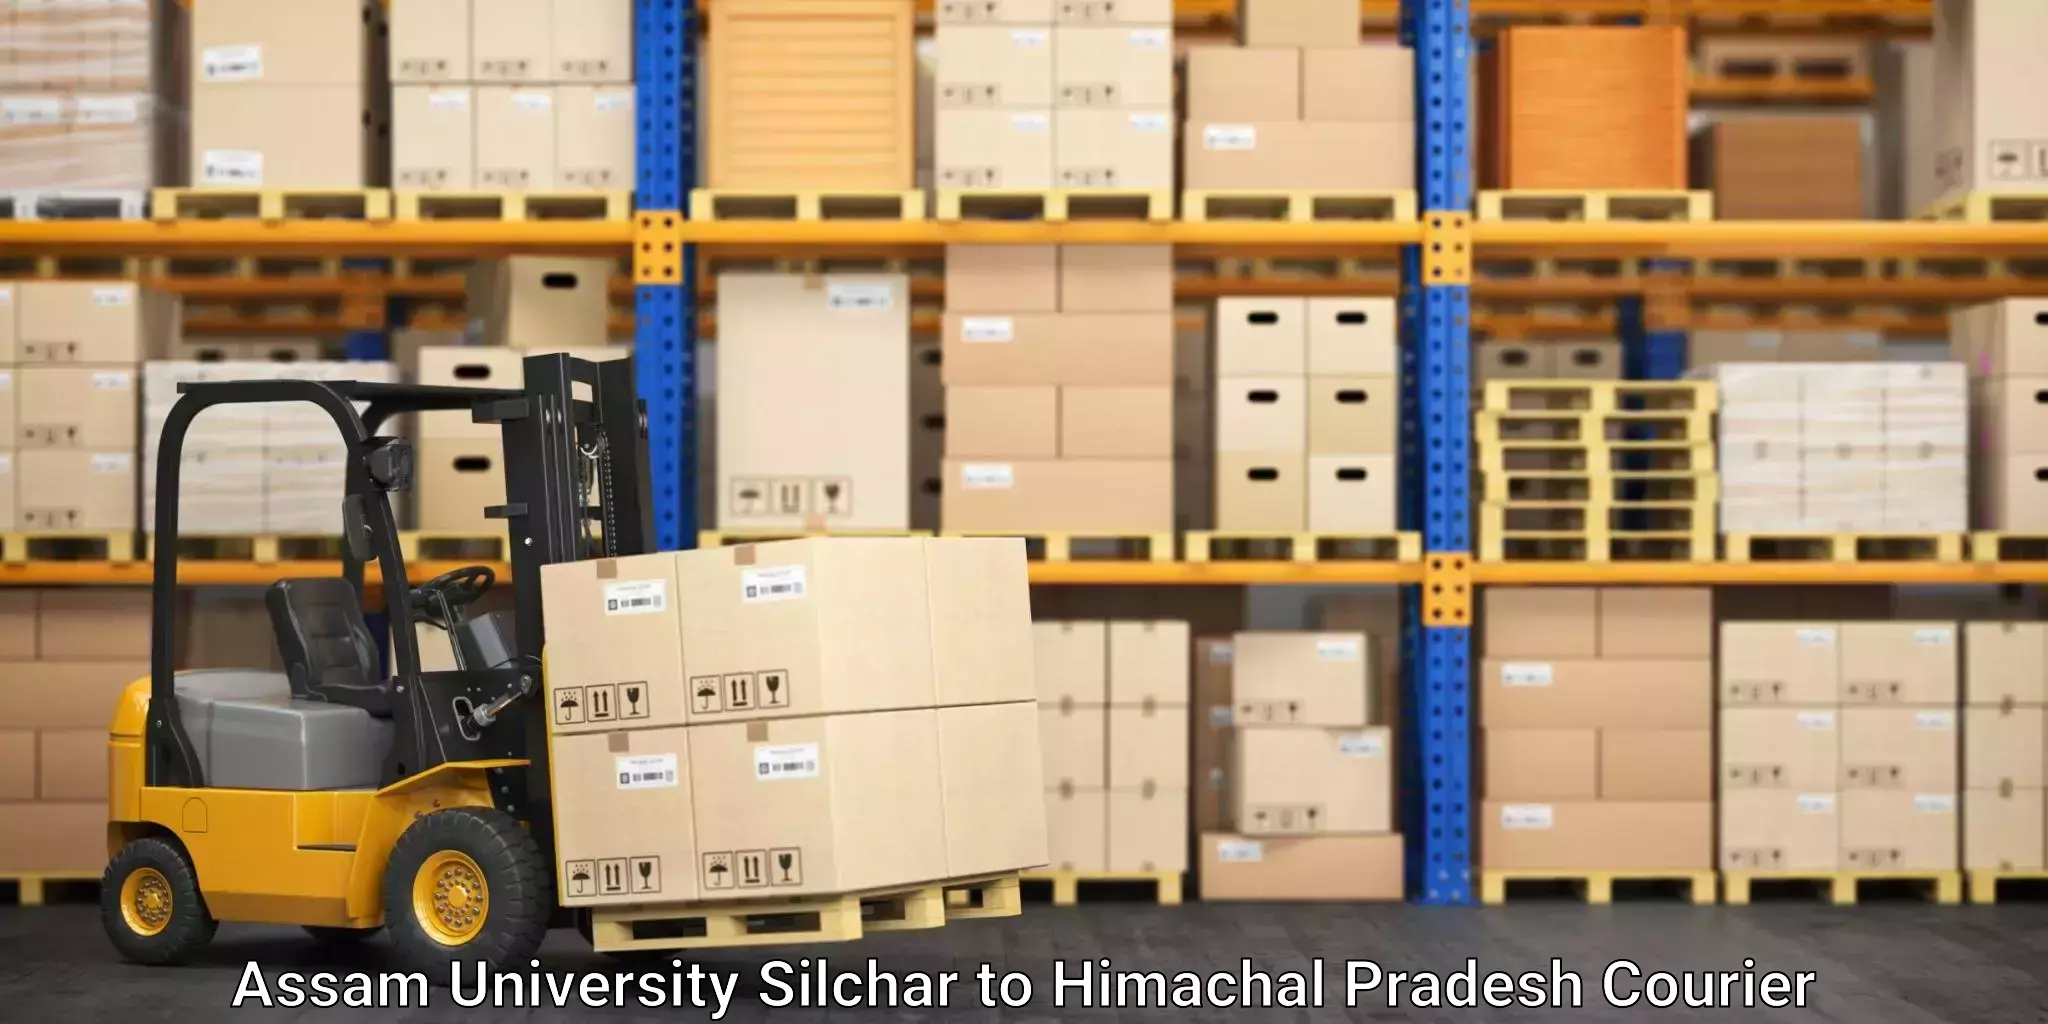 Heavyweight shipping Assam University Silchar to YS Parmar University of Horticulture and Forestry Solan